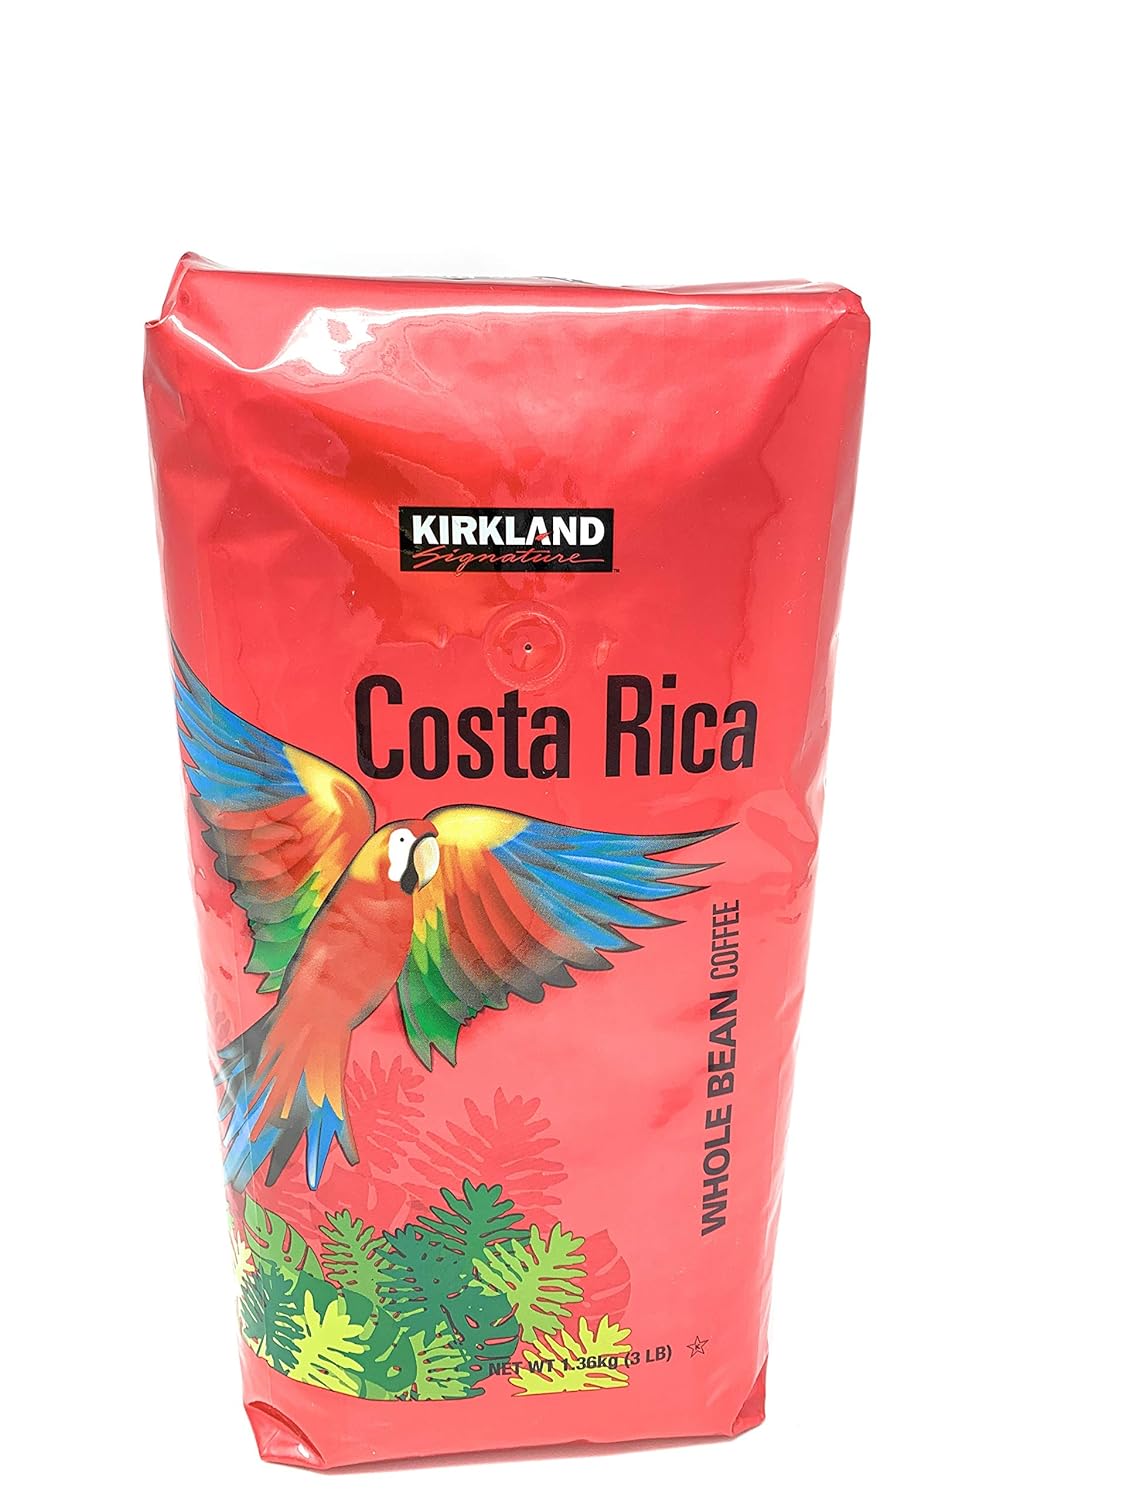 Costa Rica Coffee are dark roasted whole coffee beans coming under the brand of Kirkland Signature Coffee. Kirkland' signature coffee is grown on coffee farms at high altitudes, protected by rainforest canopies. More than 2100 small farms high in the foothills of Plamaries, and San Ramon, Costa Rica, are involved in making coffee using sustainable and environment-friendly technology. The craftsmanship handed down by each generation of family farmers combined with modern roasting techniques crea